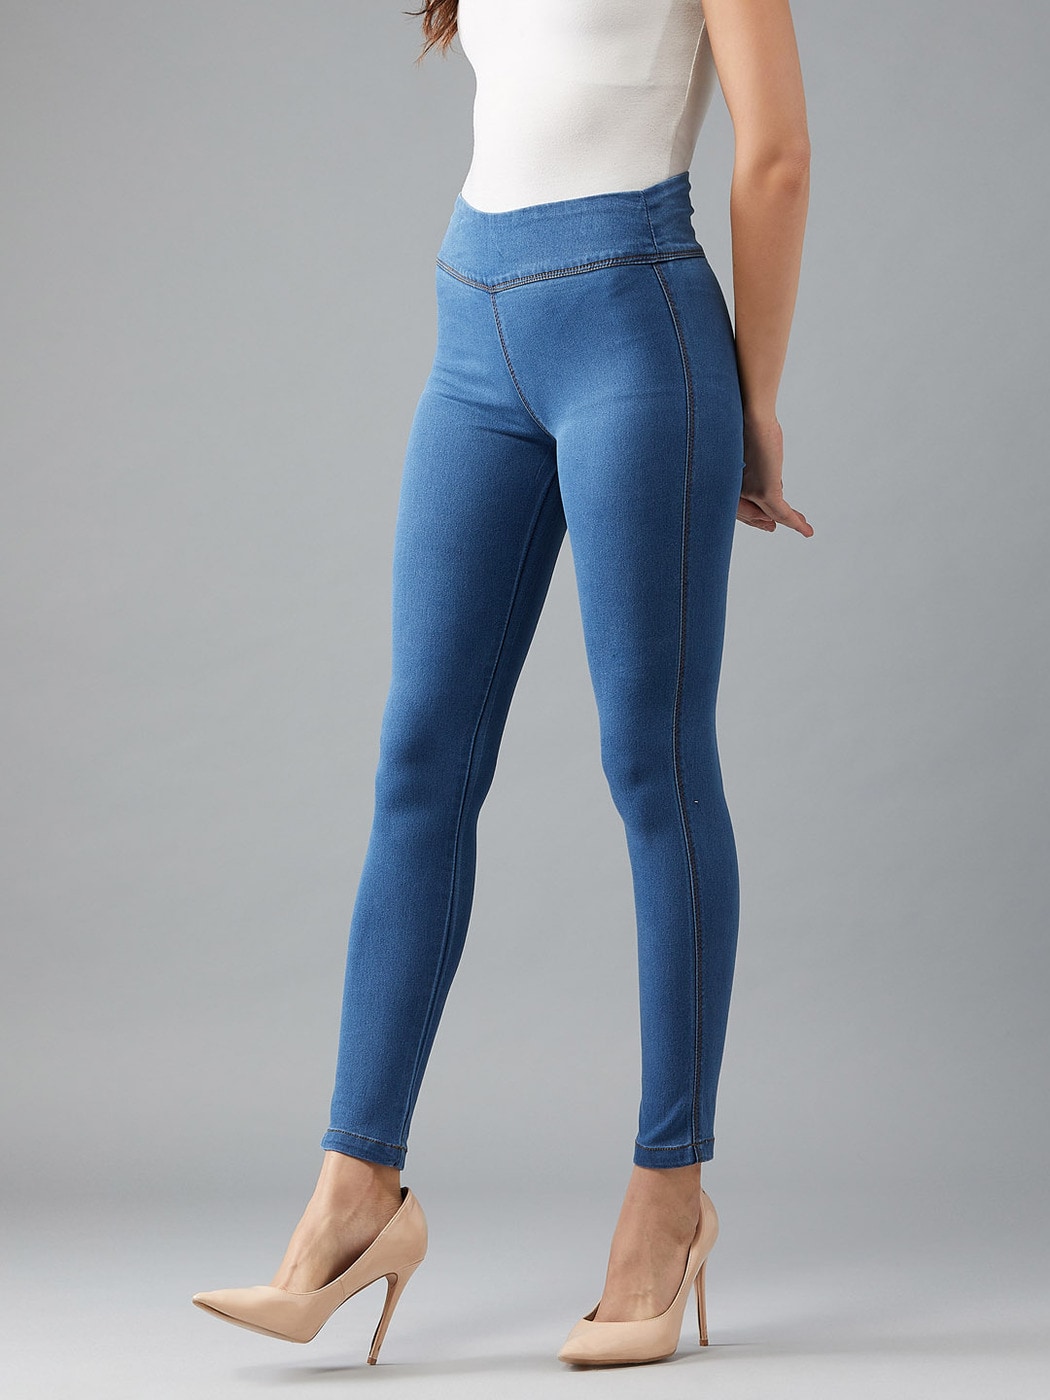 Women's High Waisted Jeggings | High Rise Jeggings | Next